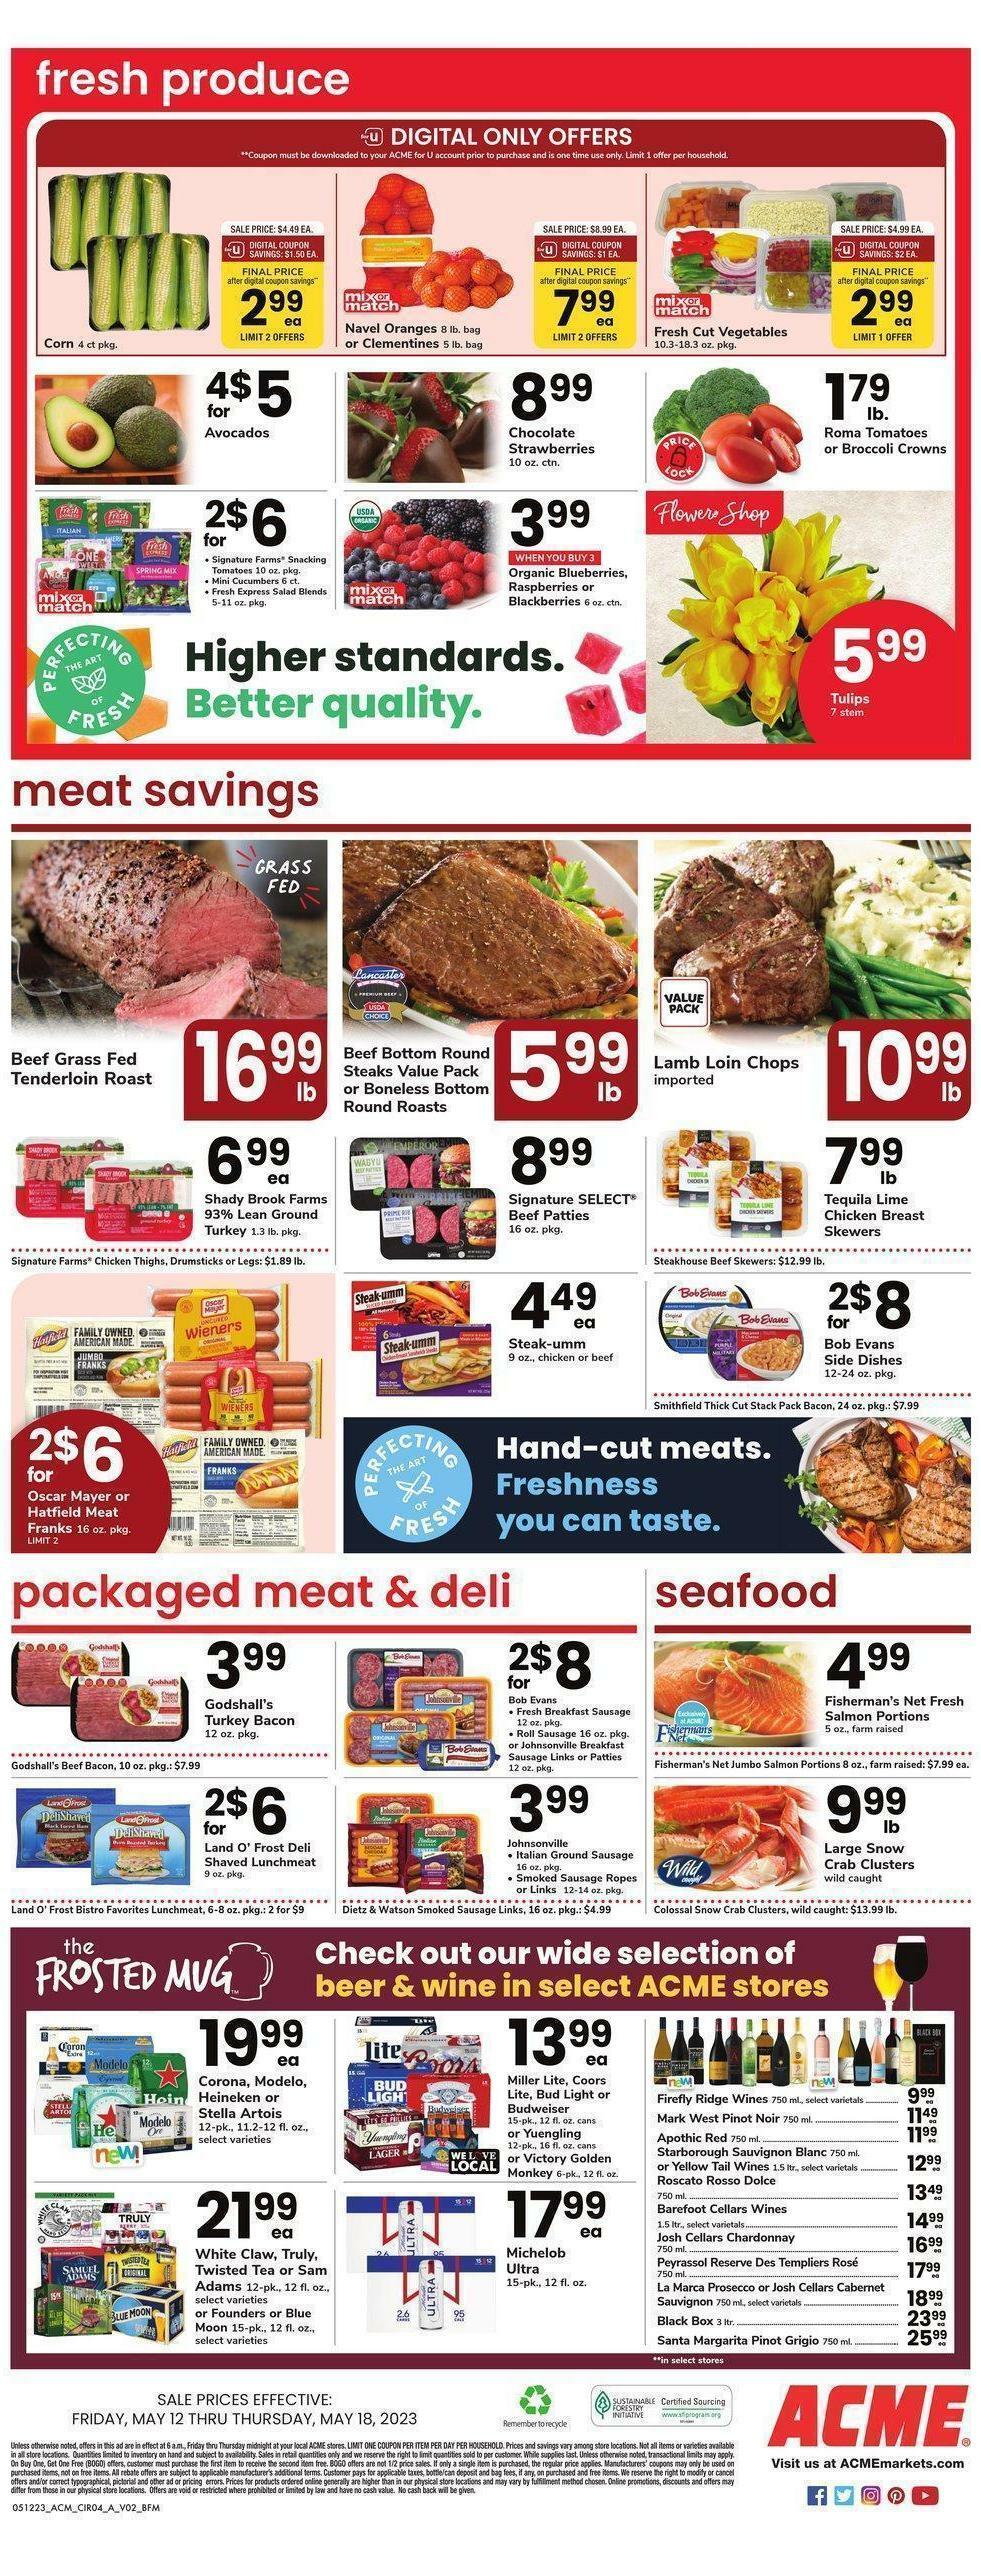 ACME Markets Weekly Ad from May 12